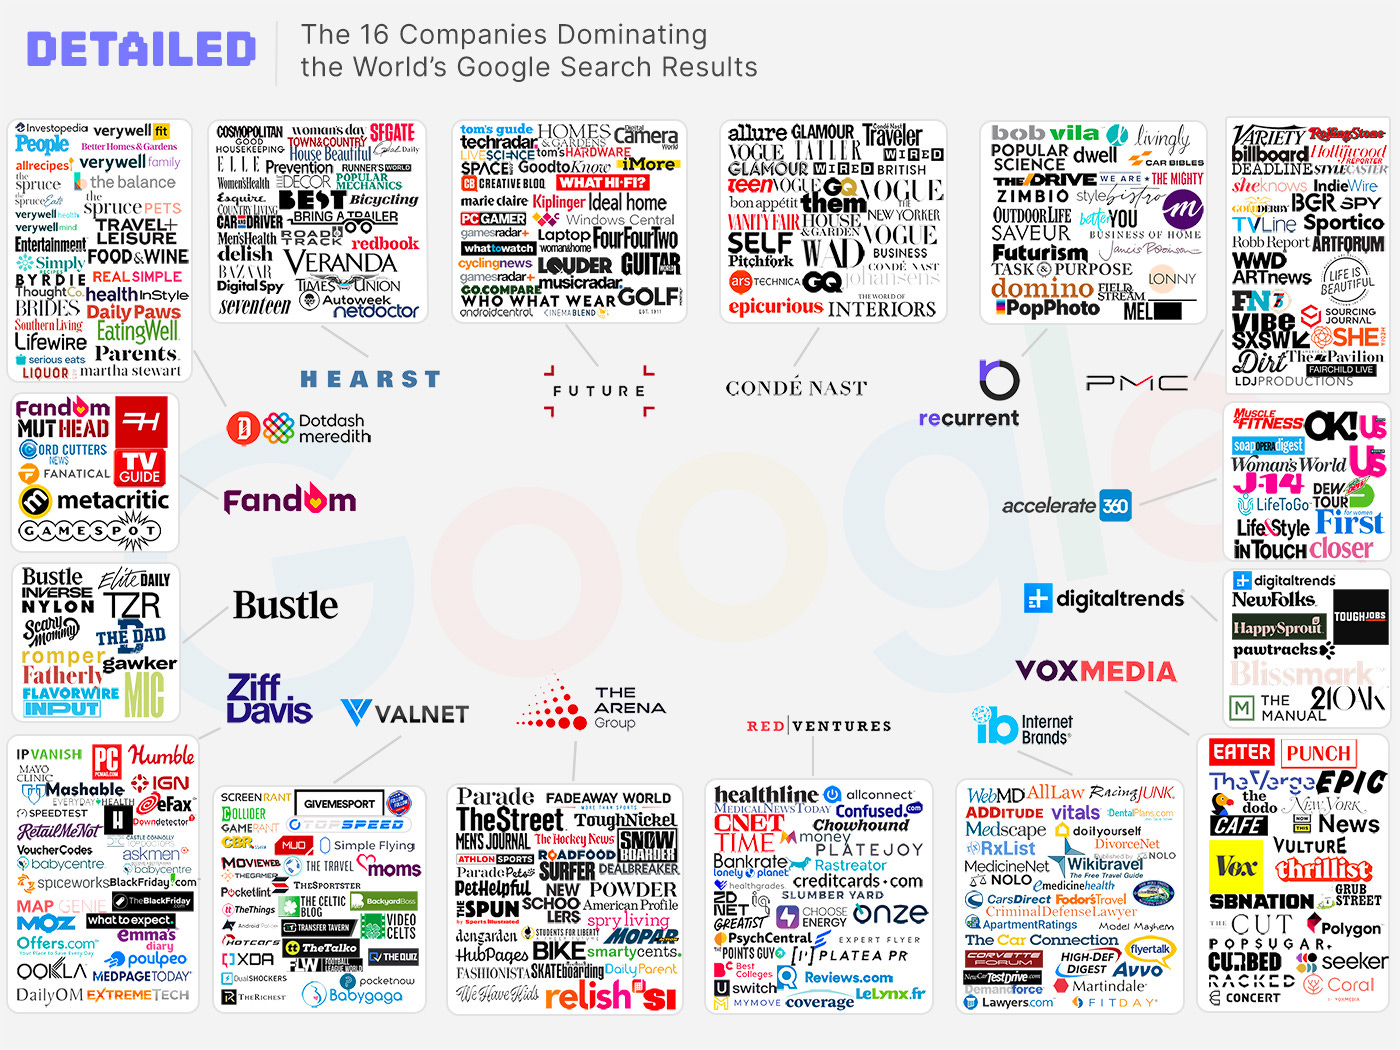 16-companies-dominating-google-search-results-2.jpg